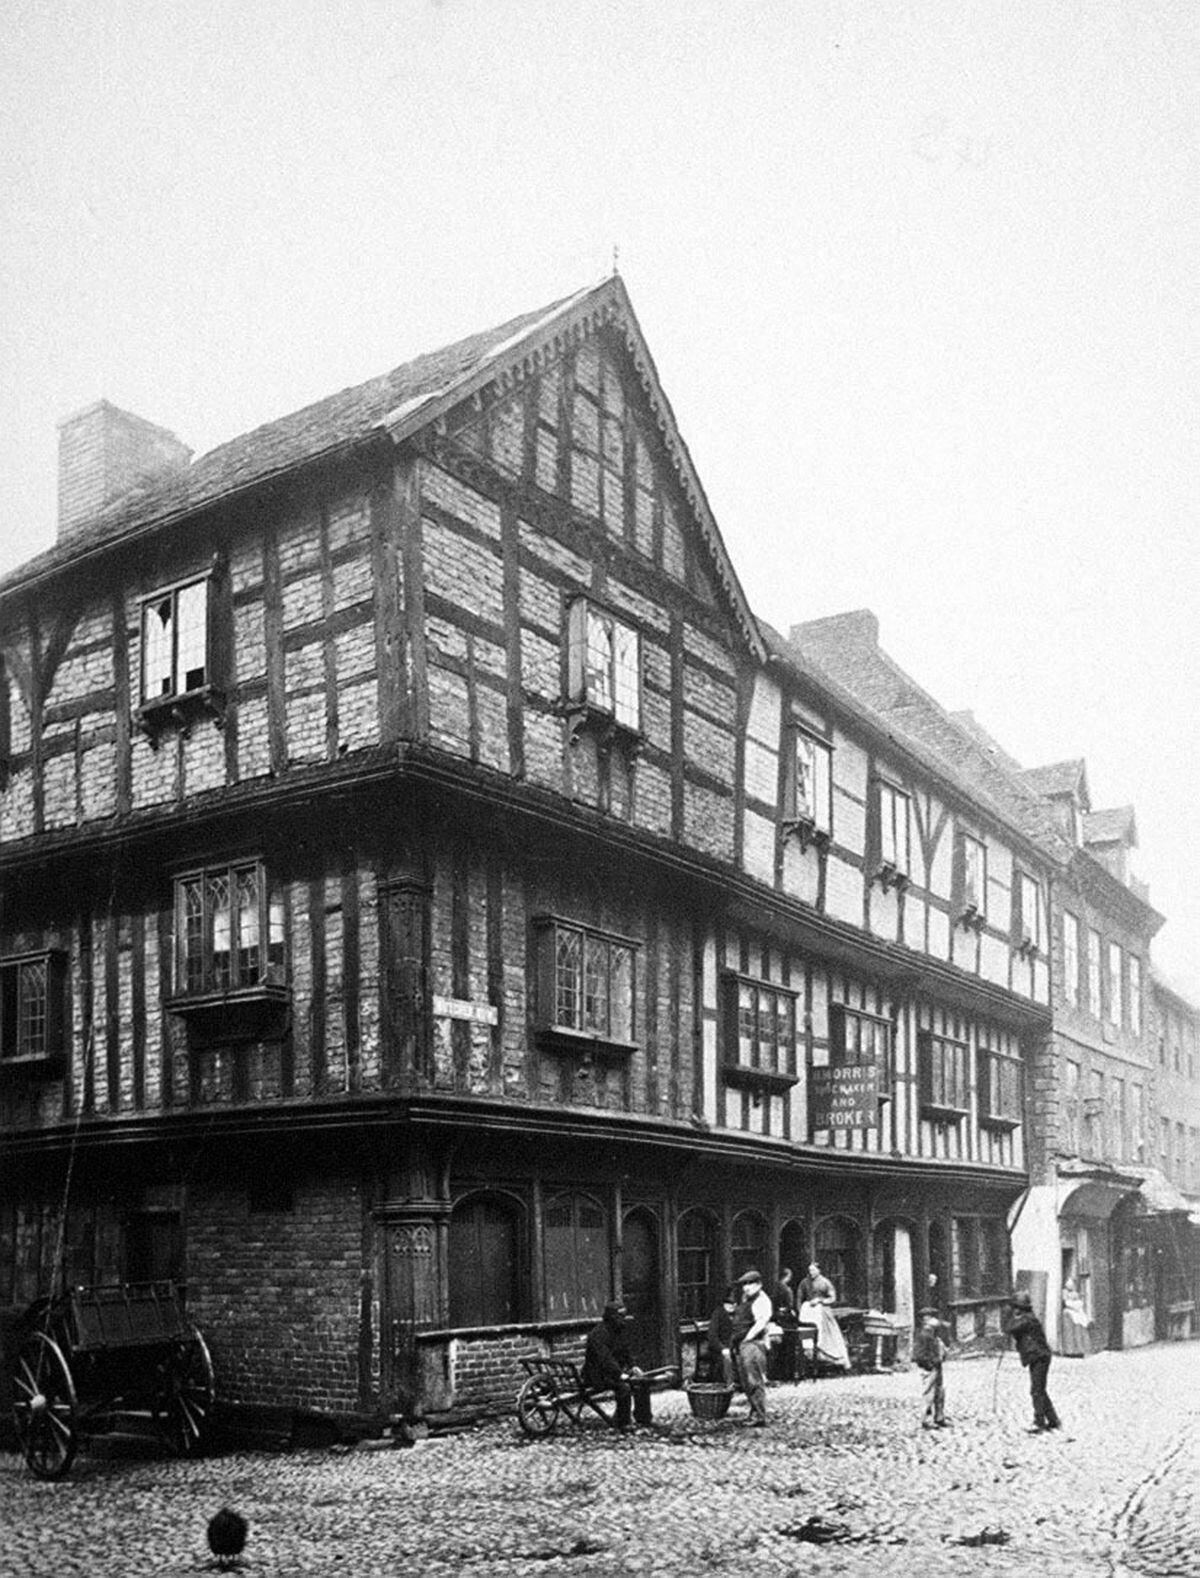 A very early photograph of a distinctive building on the corner of Butcher Row and Fish Street, possibly from the late Victorian era